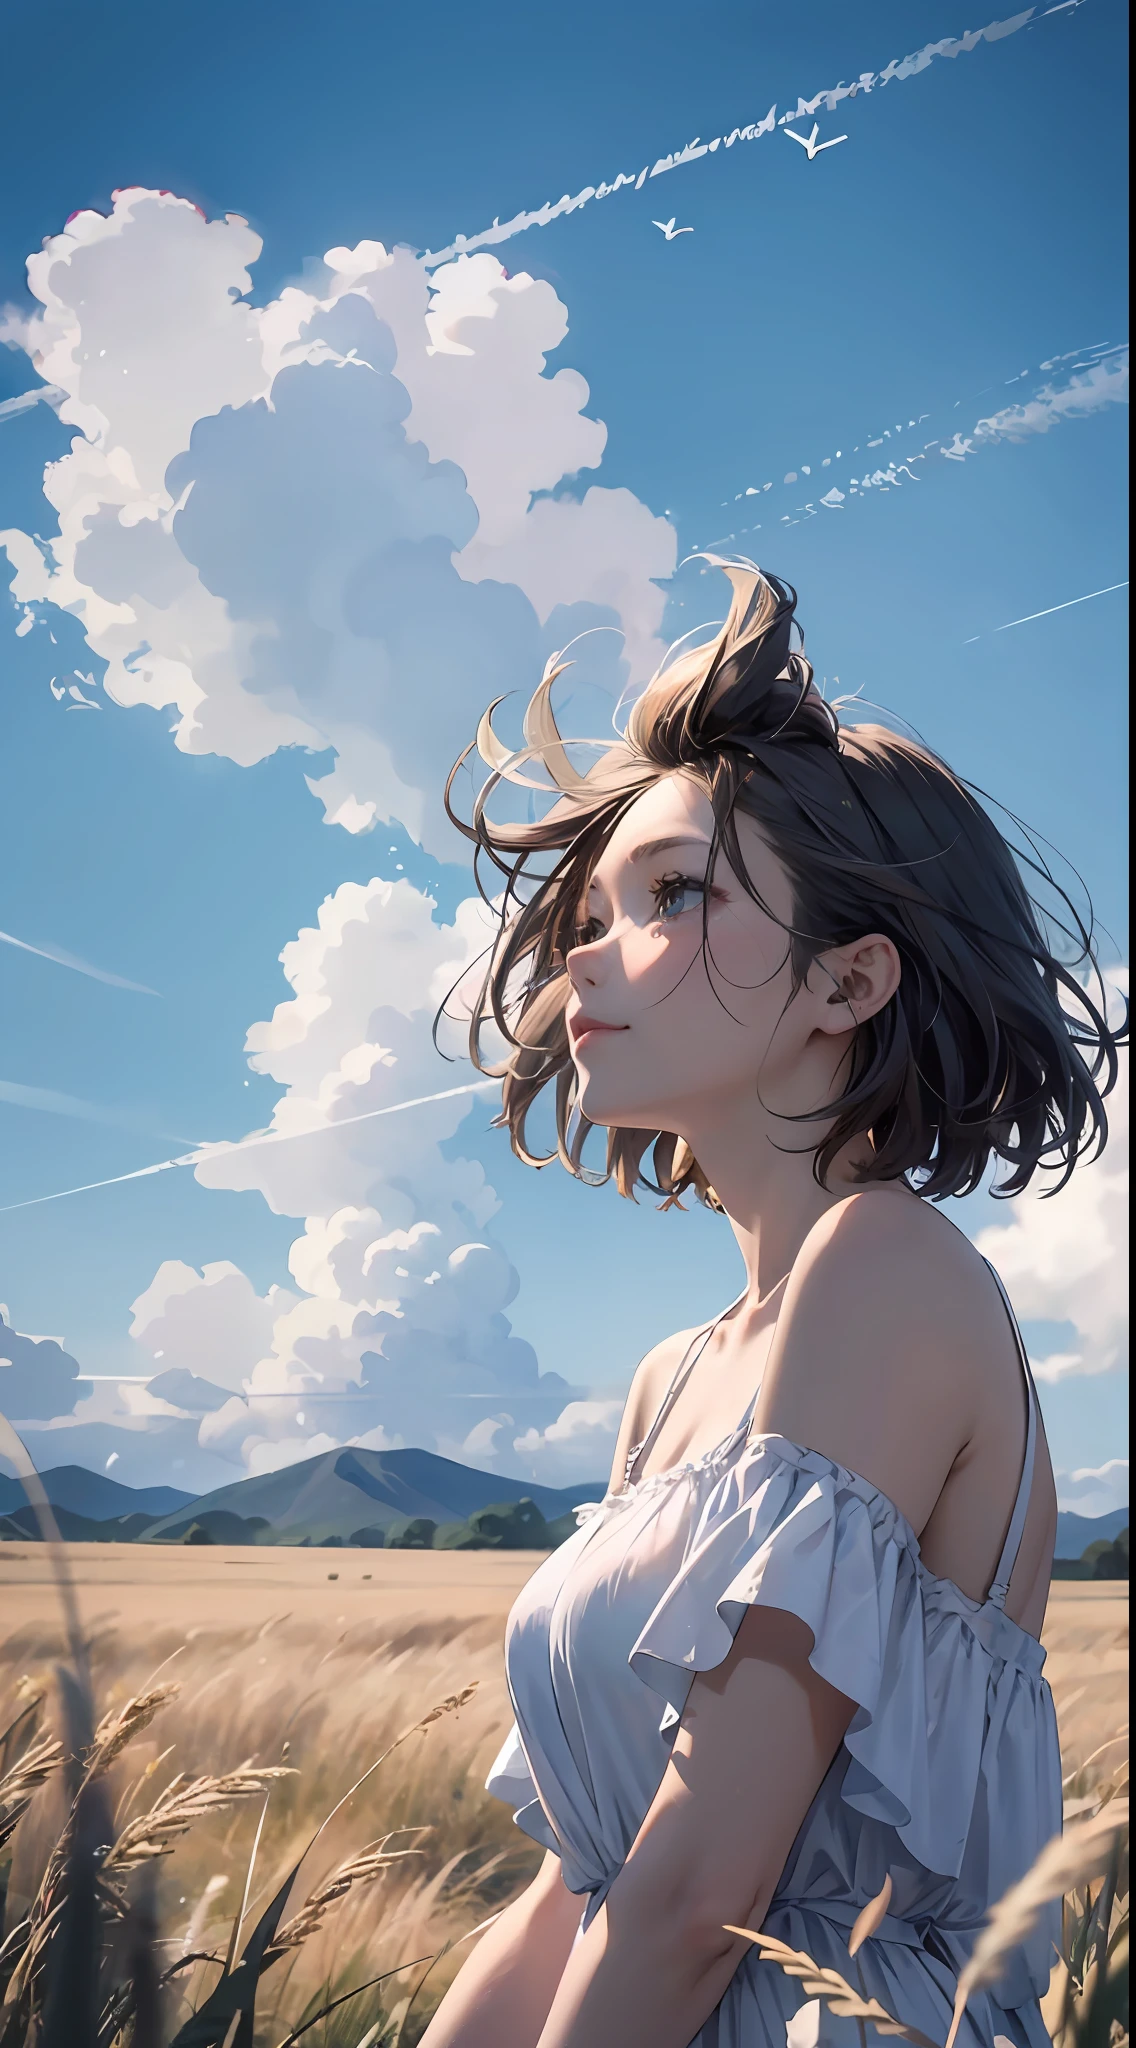 grass field、blue open sky、White cumulonimbus clouds、contrail、glowing sun、Steppe grass swaying in the wind、Photoquality、Live action、Realisticity、Transparency、Realistic depiction、The 8k quality、nffsw、Digital SLR、hightquality、film grains、FujifilmXT3、Girl in white camisole dress、Standing posture、bare-legged、Hair swaying in the wind、Hair to the shoulders、Colossal 、Big eyeedium bob、A slight smil、